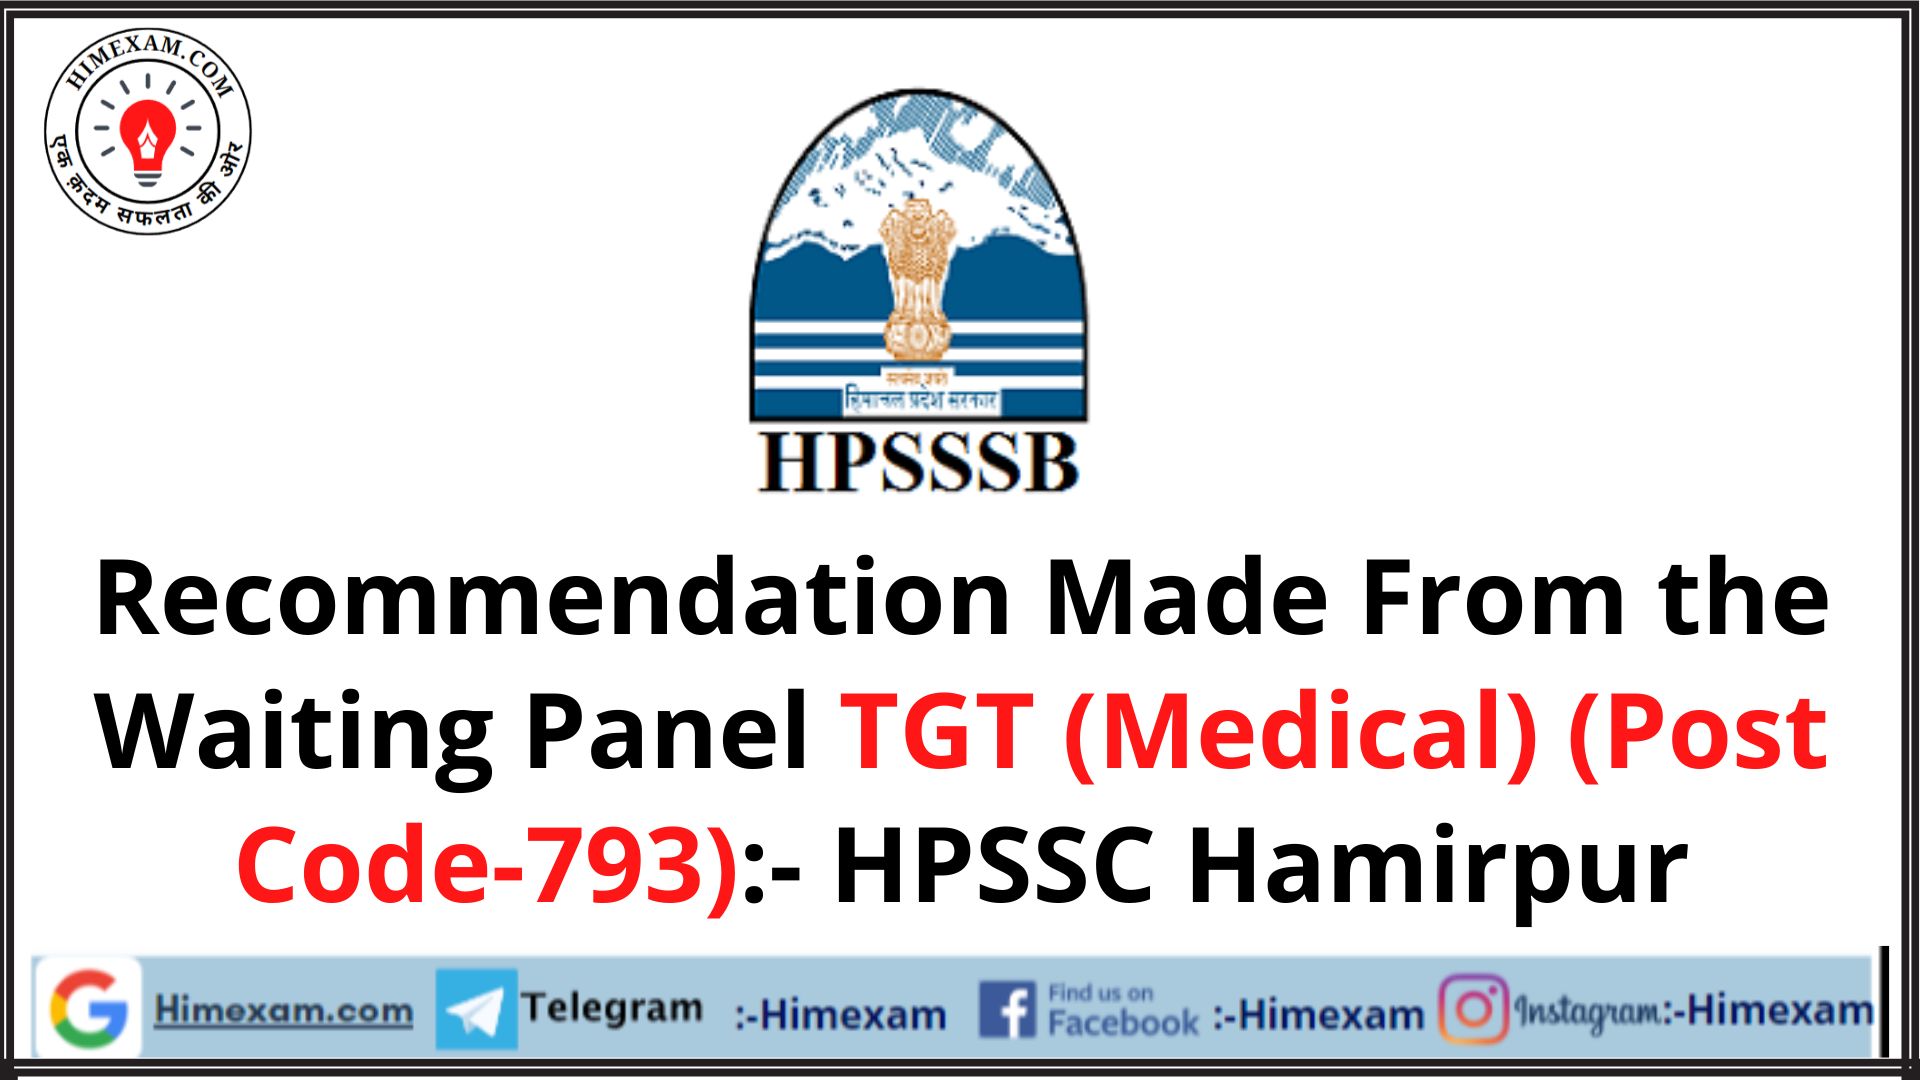 Recommendation Made From the Waiting Panel  TGT (Medical) (Post Code-793):- HPSSC Hamirpur